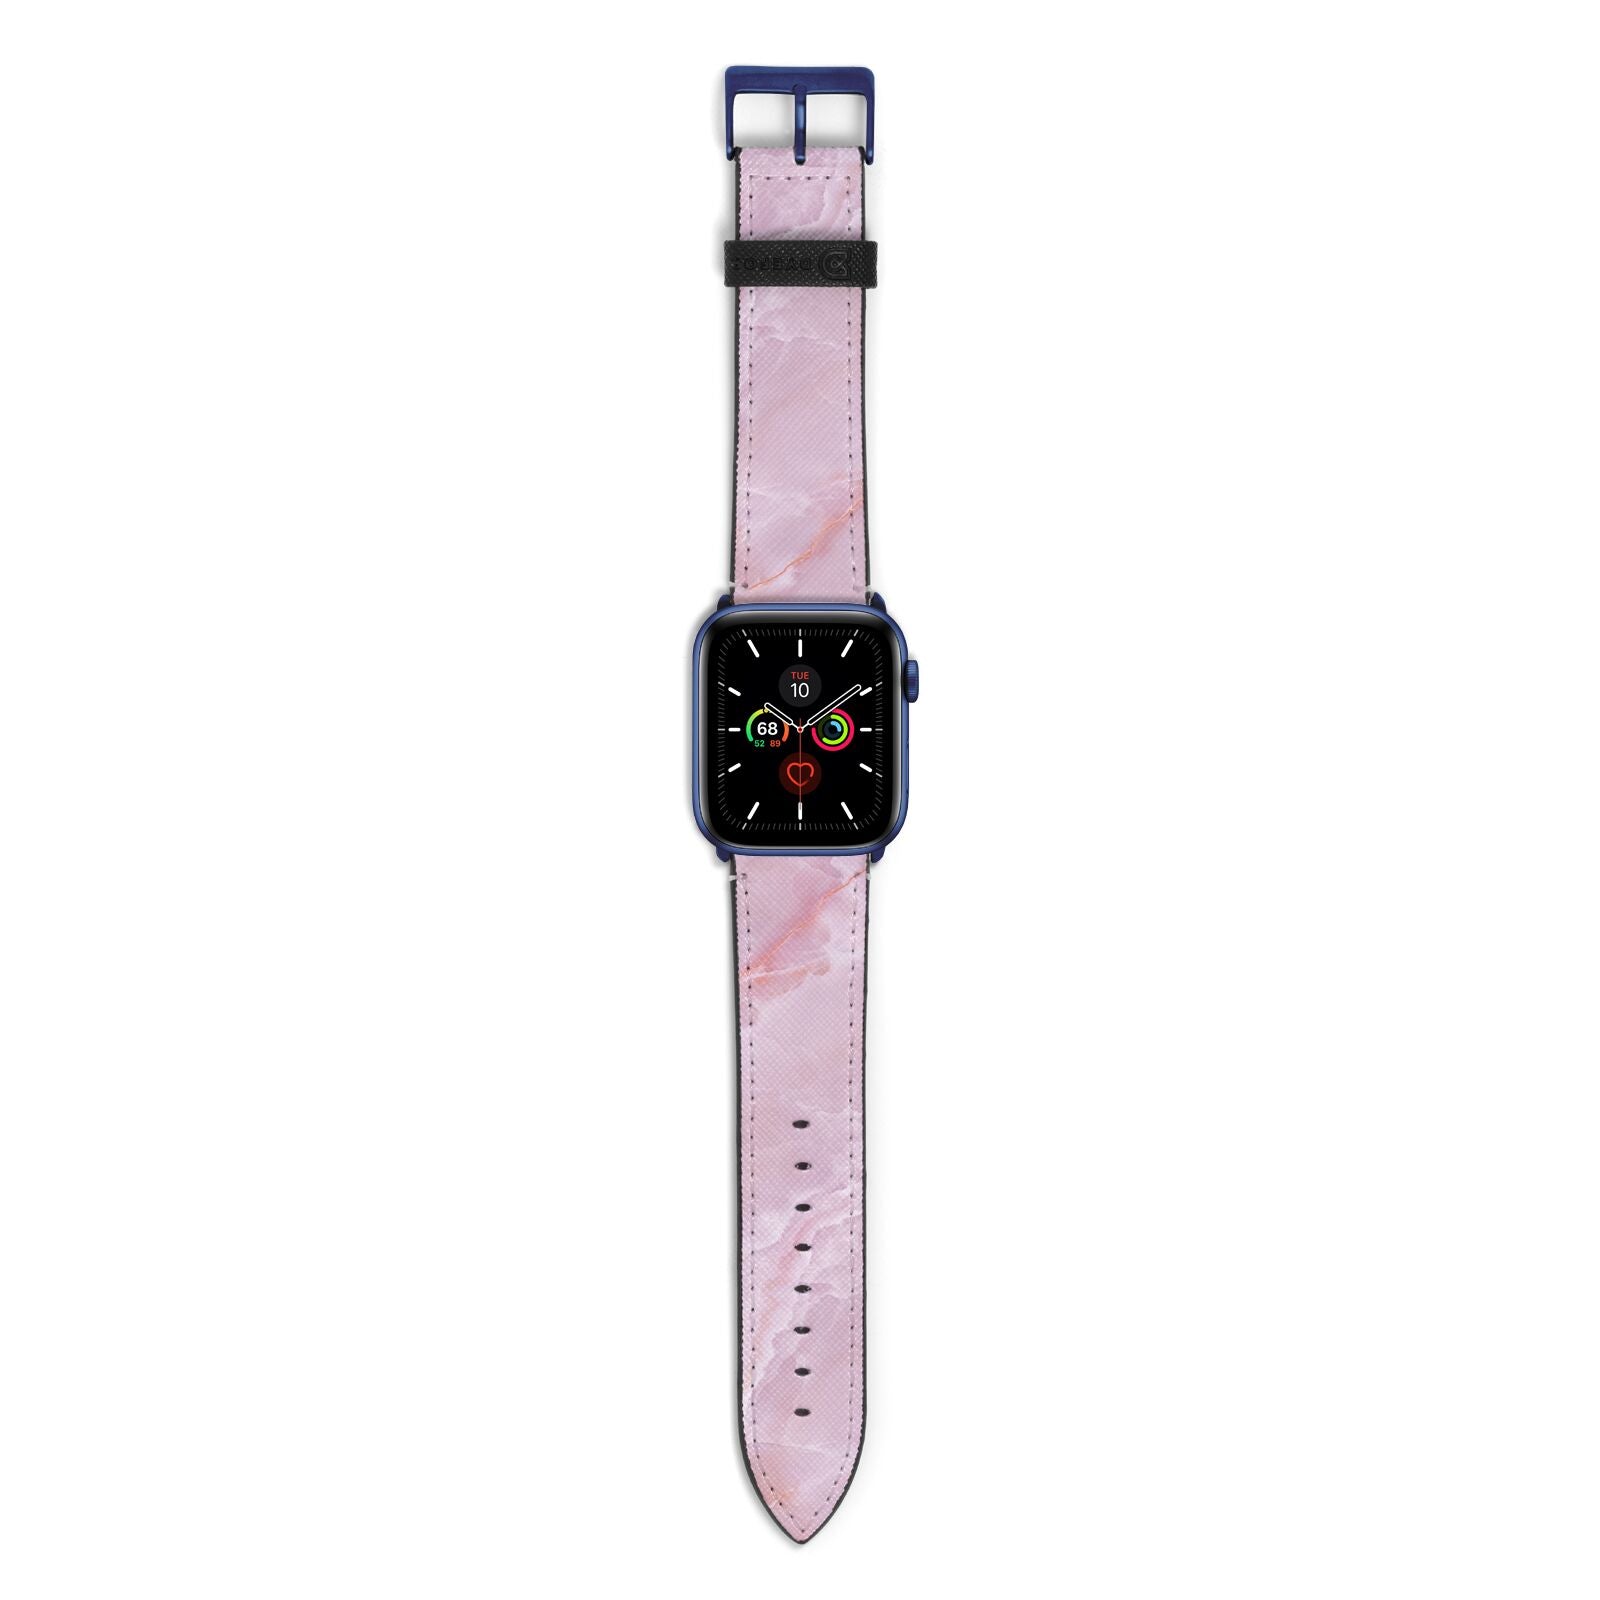 Dreamy Pink Marble Apple Watch Strap with Blue Hardware